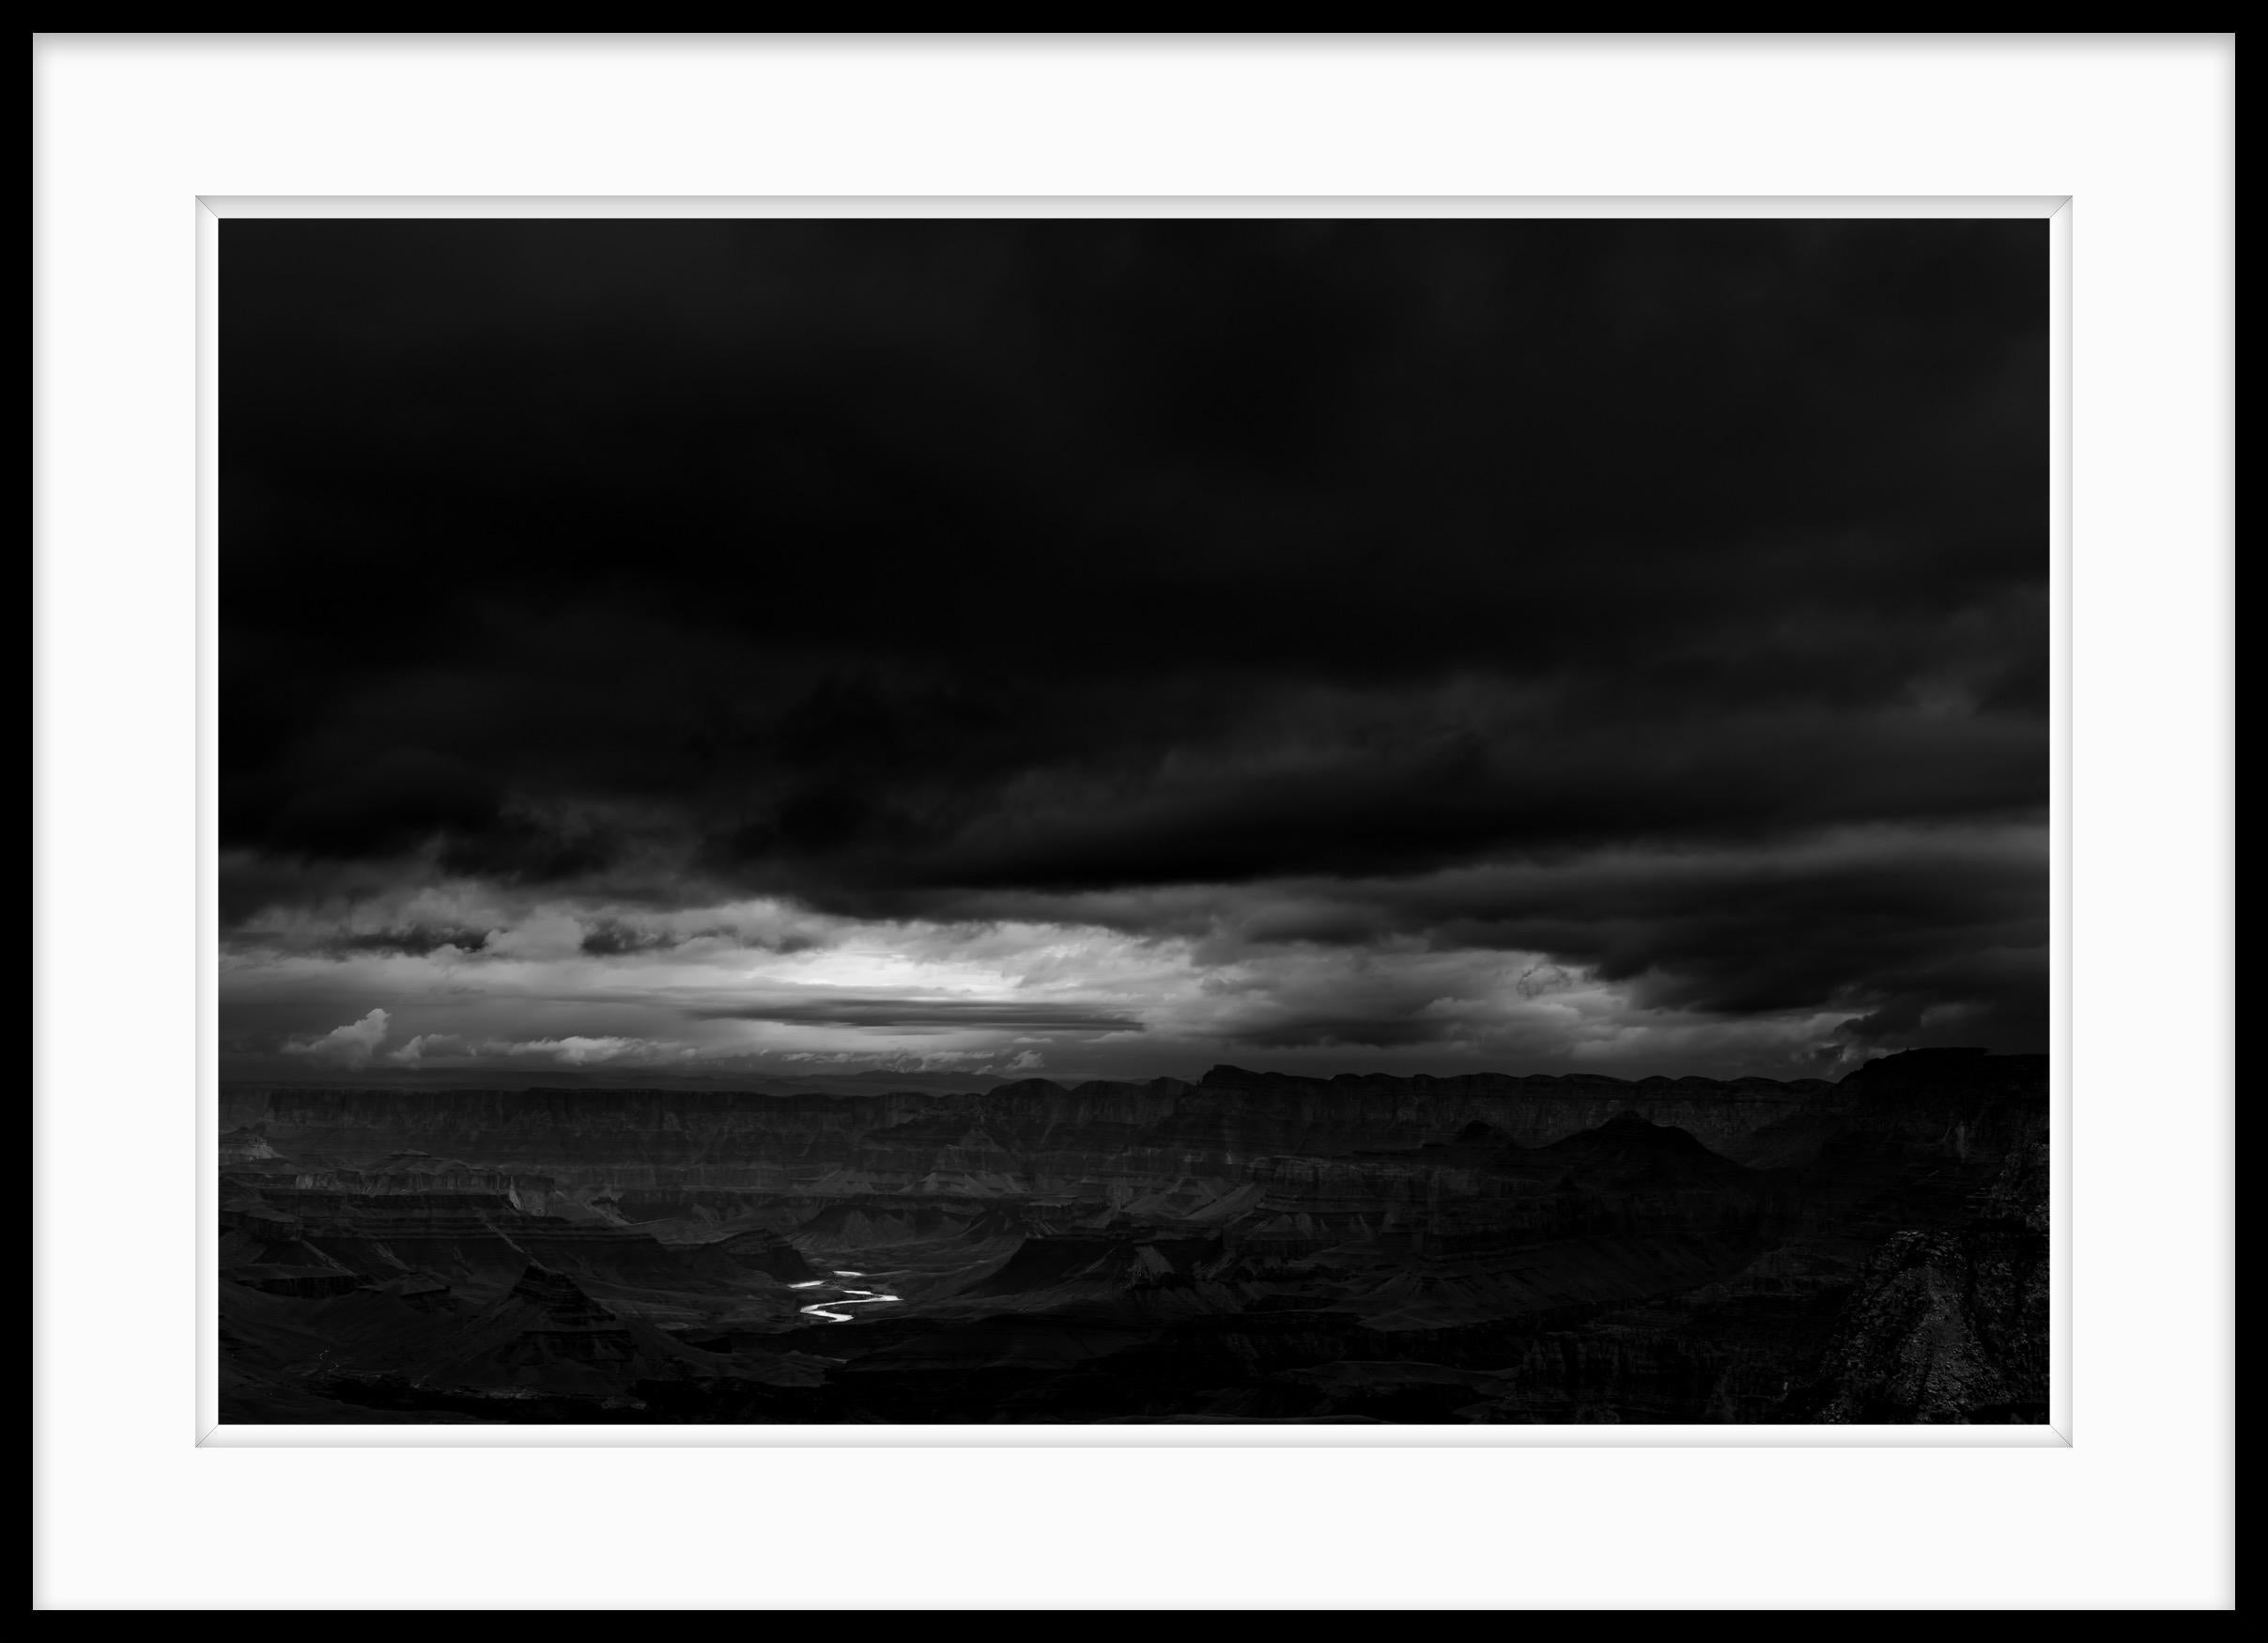  Limited Edition Black and White Photograph - Colorado River 2018 Taken on extensive photographic travel through the West in 2018. 

About Howard Lewis:
Lewis’ artistic practice often explores science, engineering, technology, and innovation. His